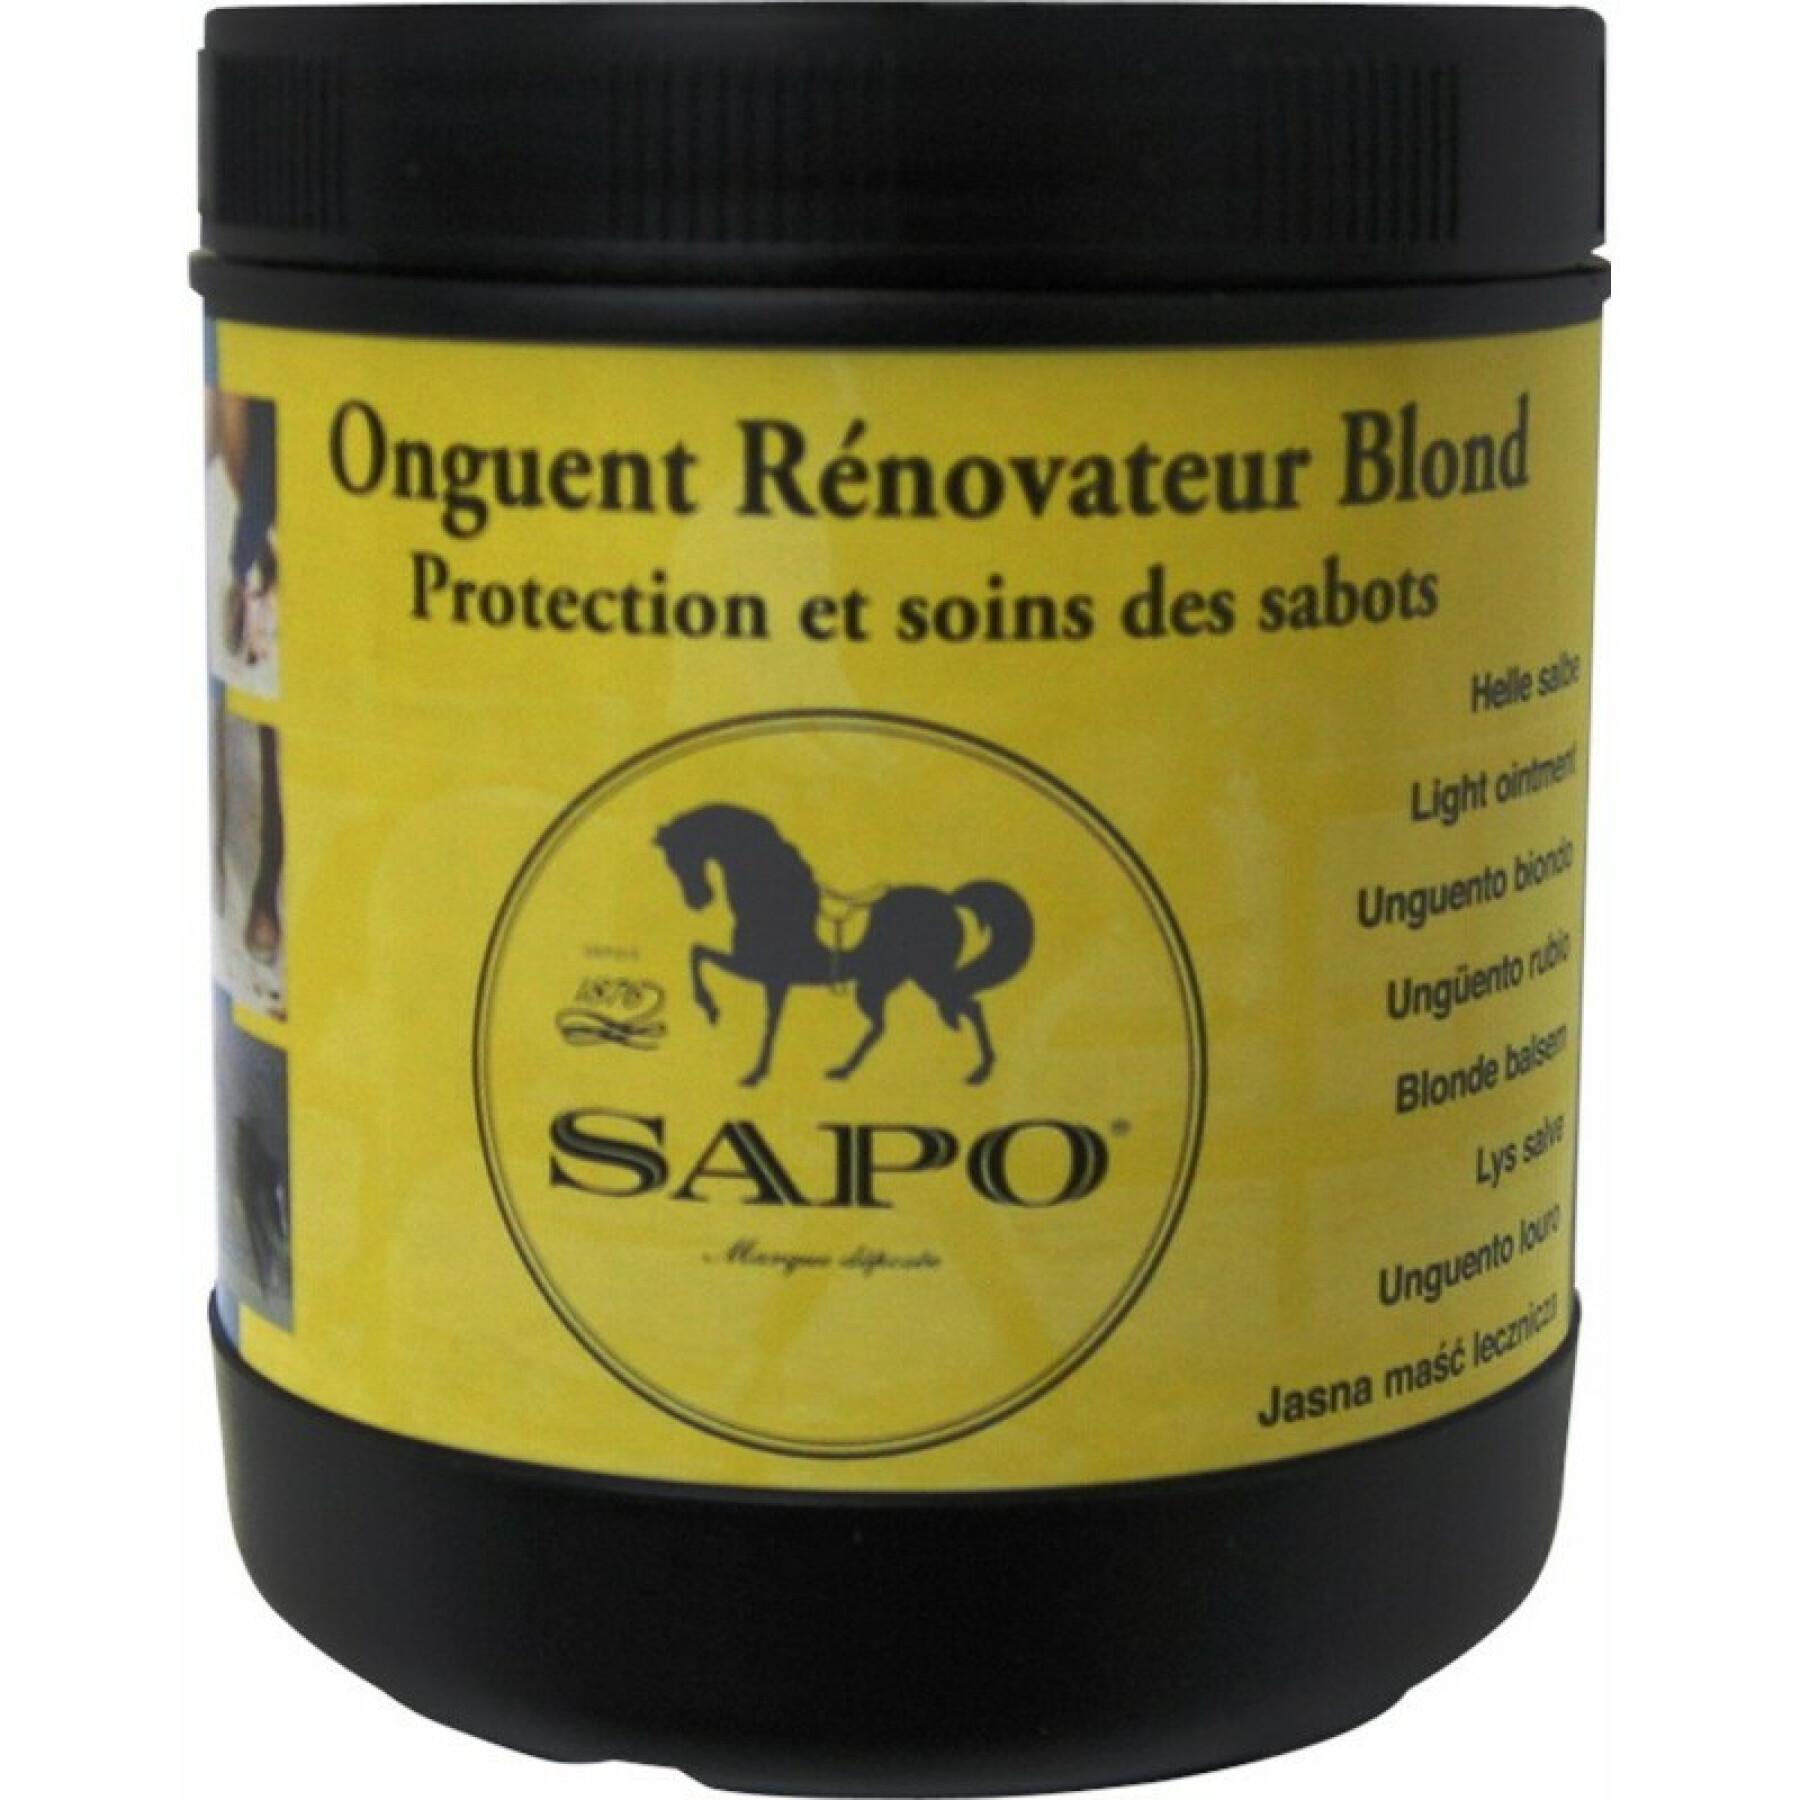 Hoof care for horses renovating ointment Oleum 750ml